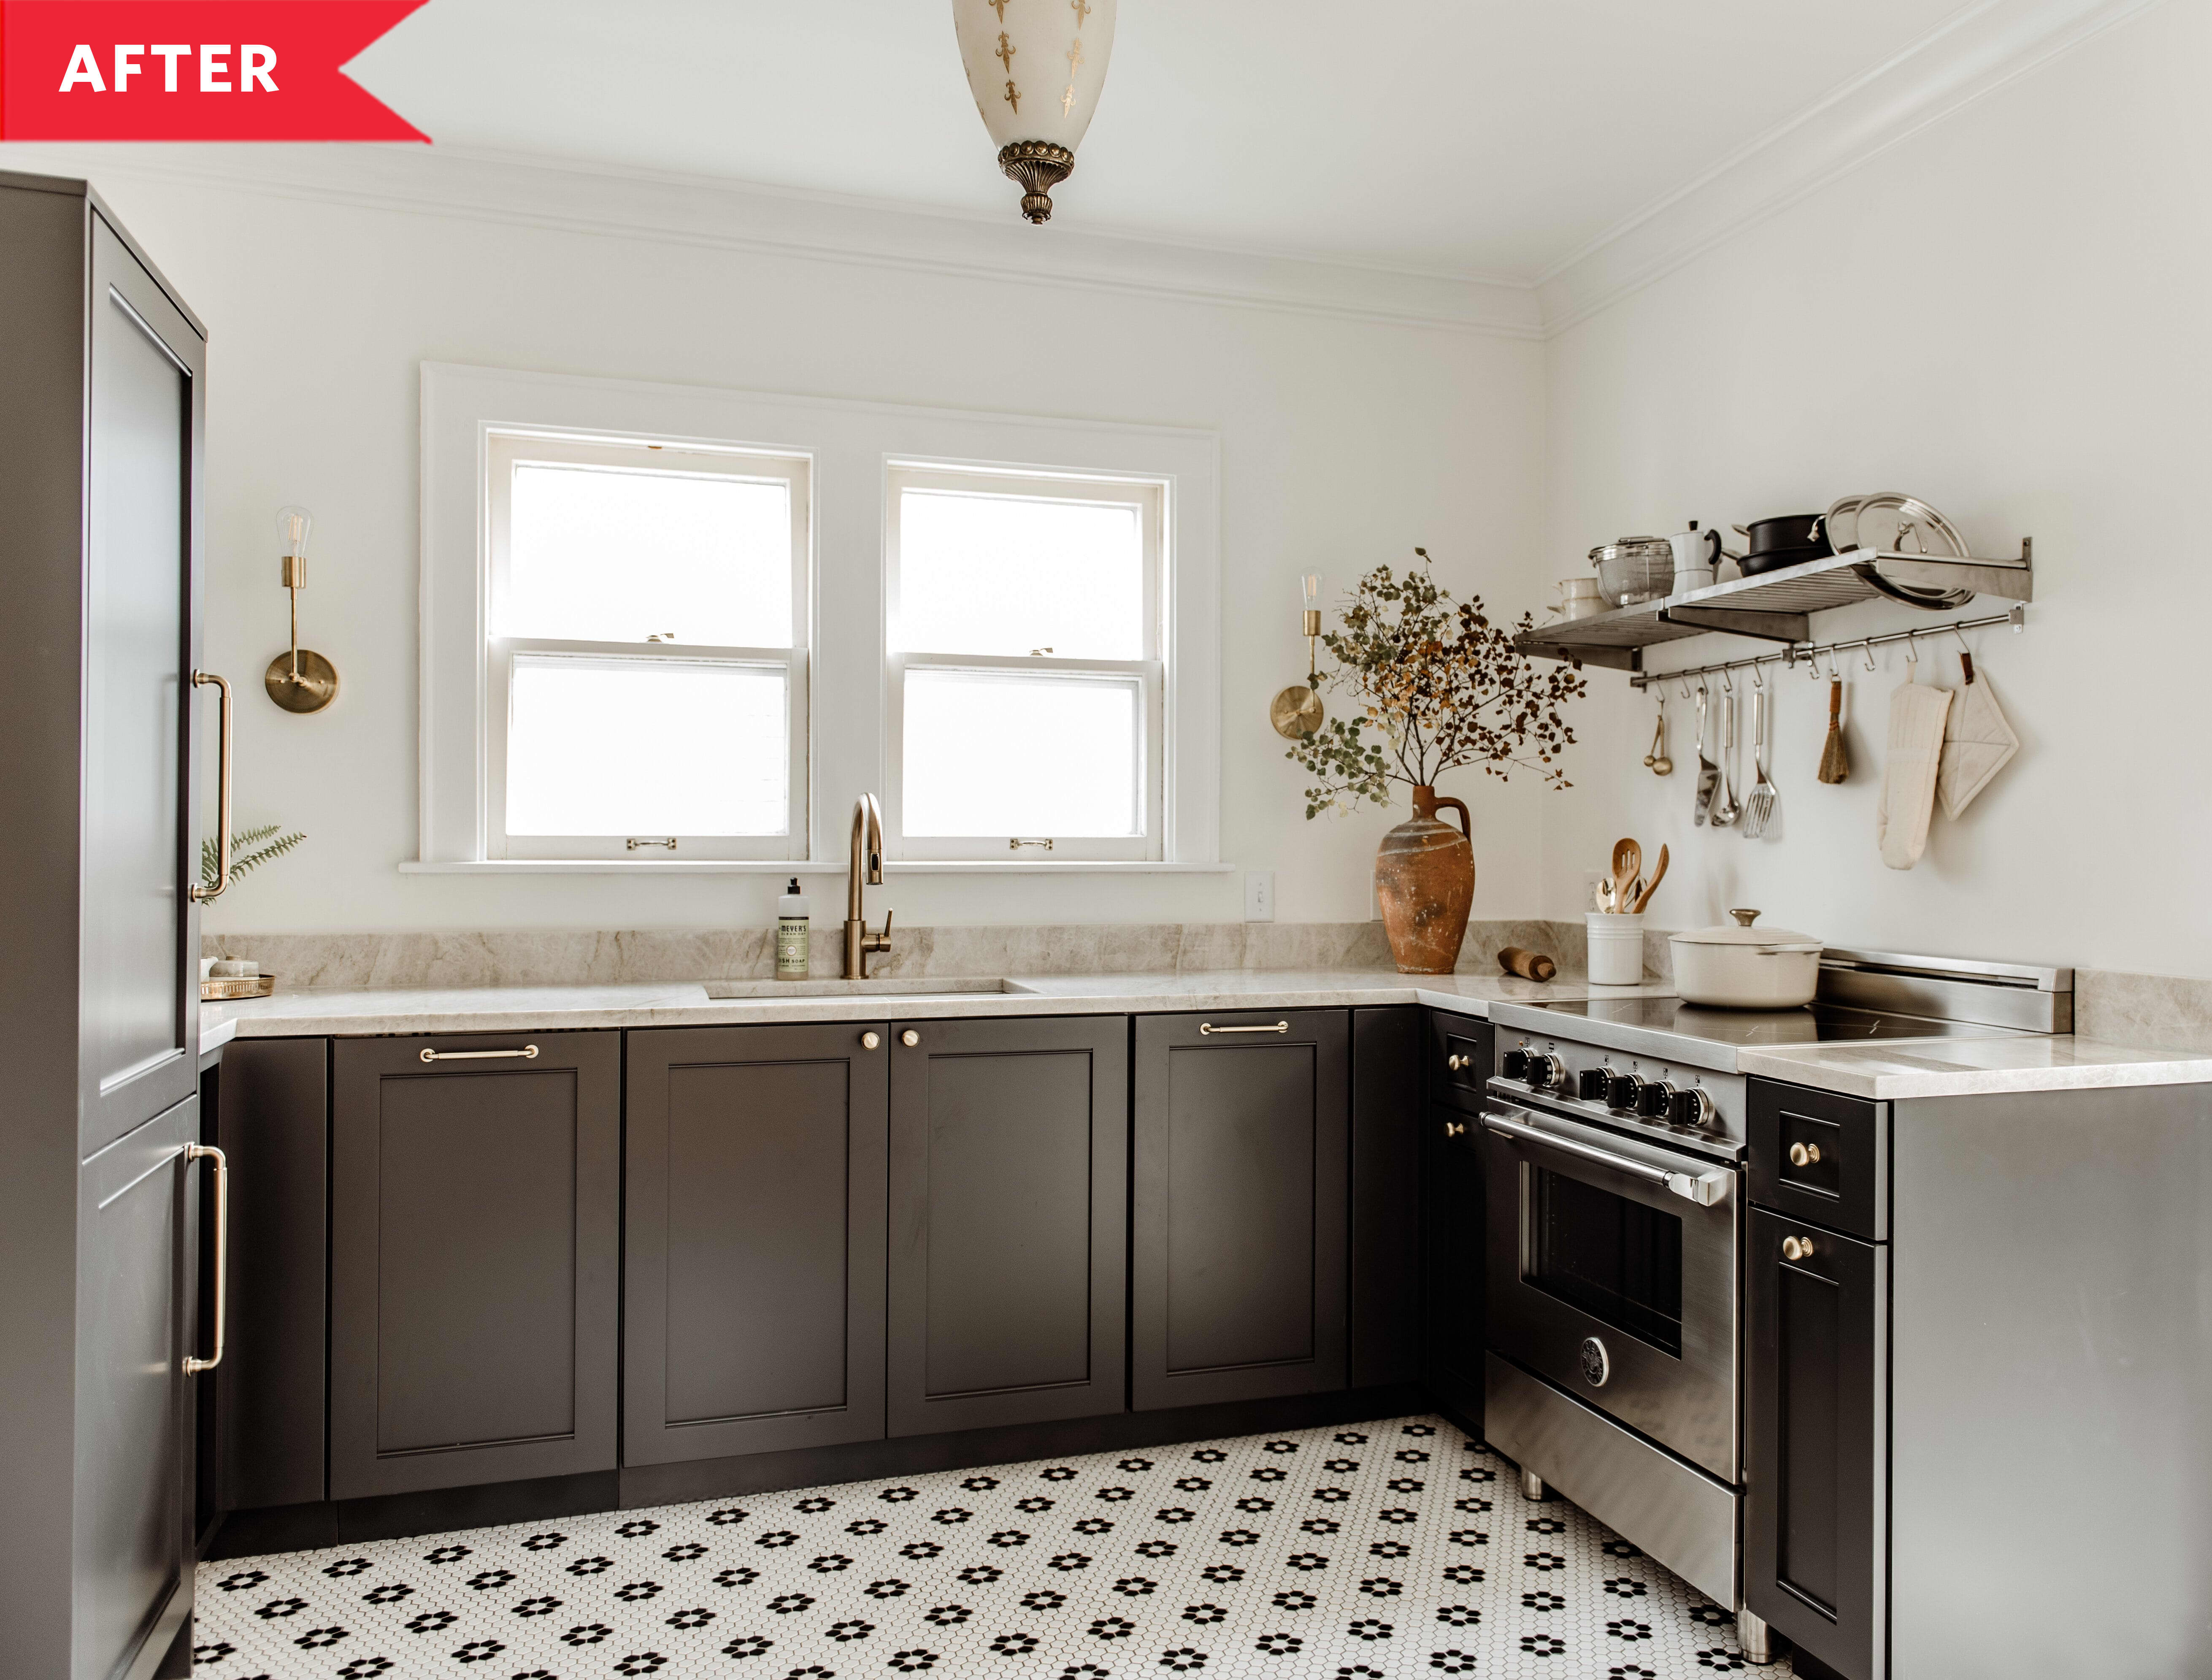 After: Bright, modern farmhouse-style kitchen with black and white tile floors